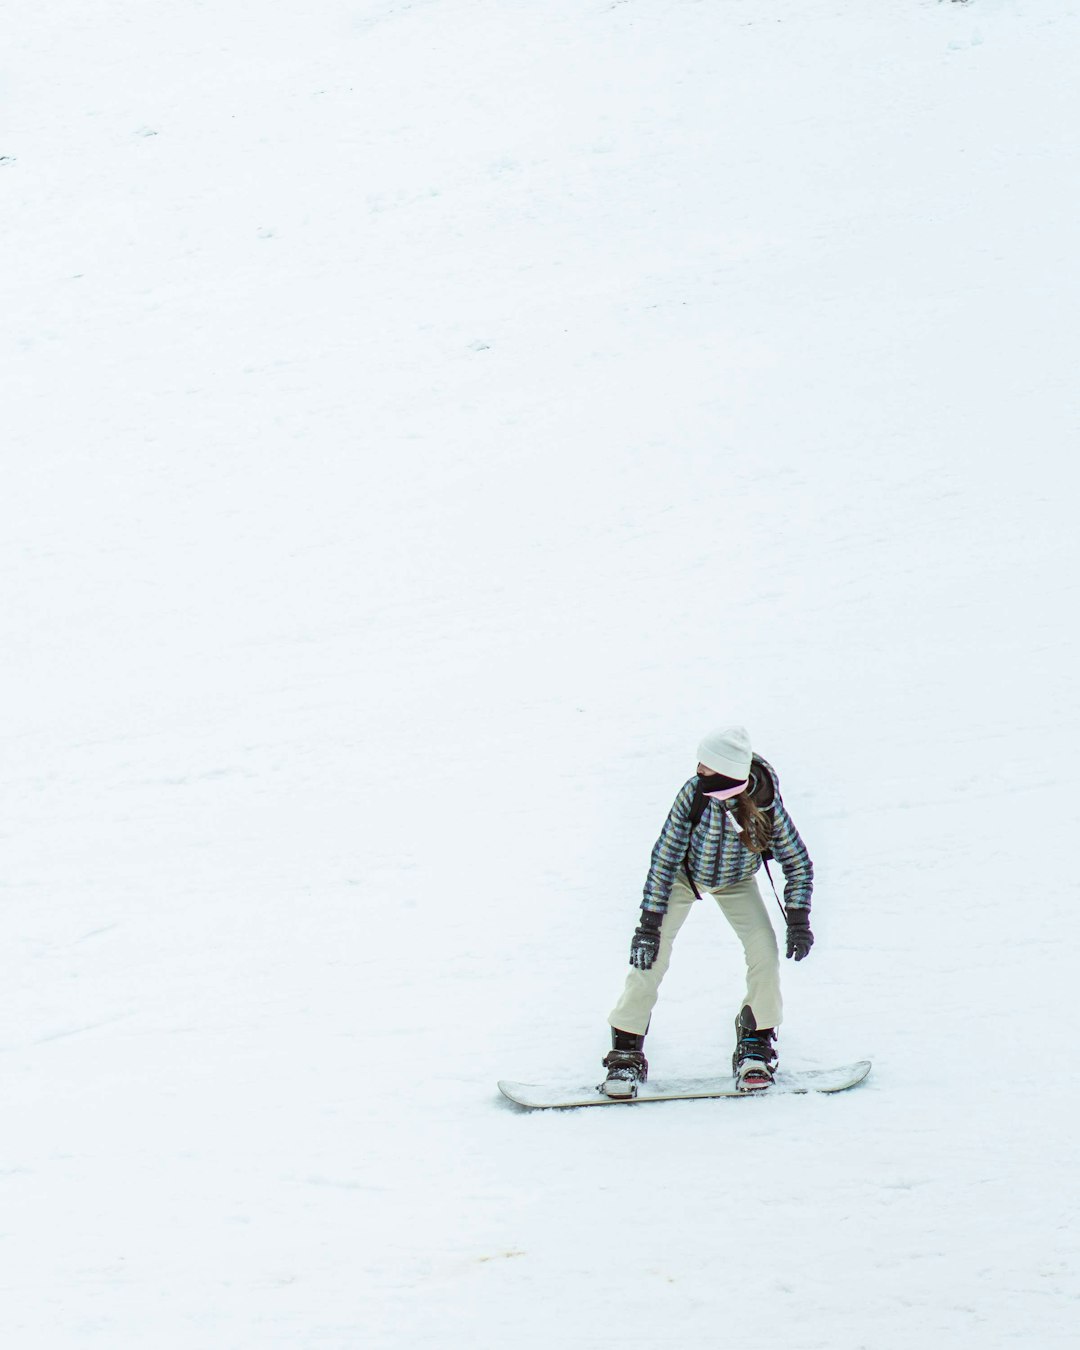 person in white jacket and black pants riding snow ski